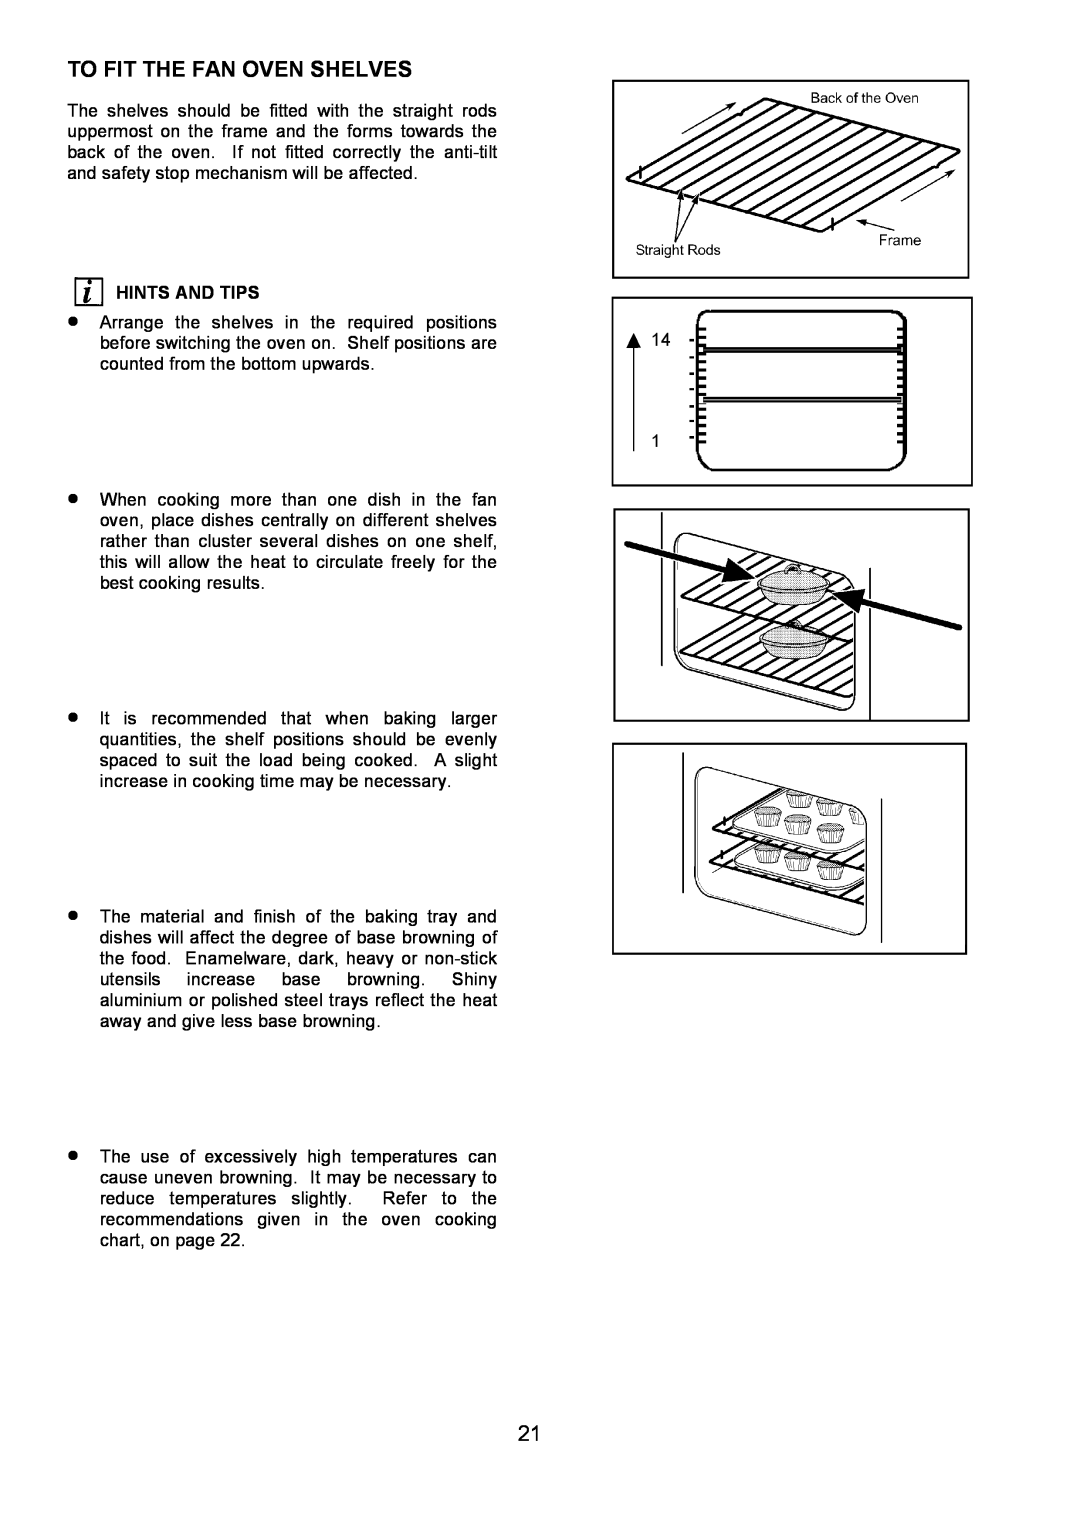 AEG 3210 BU installation instructions To Fit The Fan Oven Shelves, Hints And Tips 